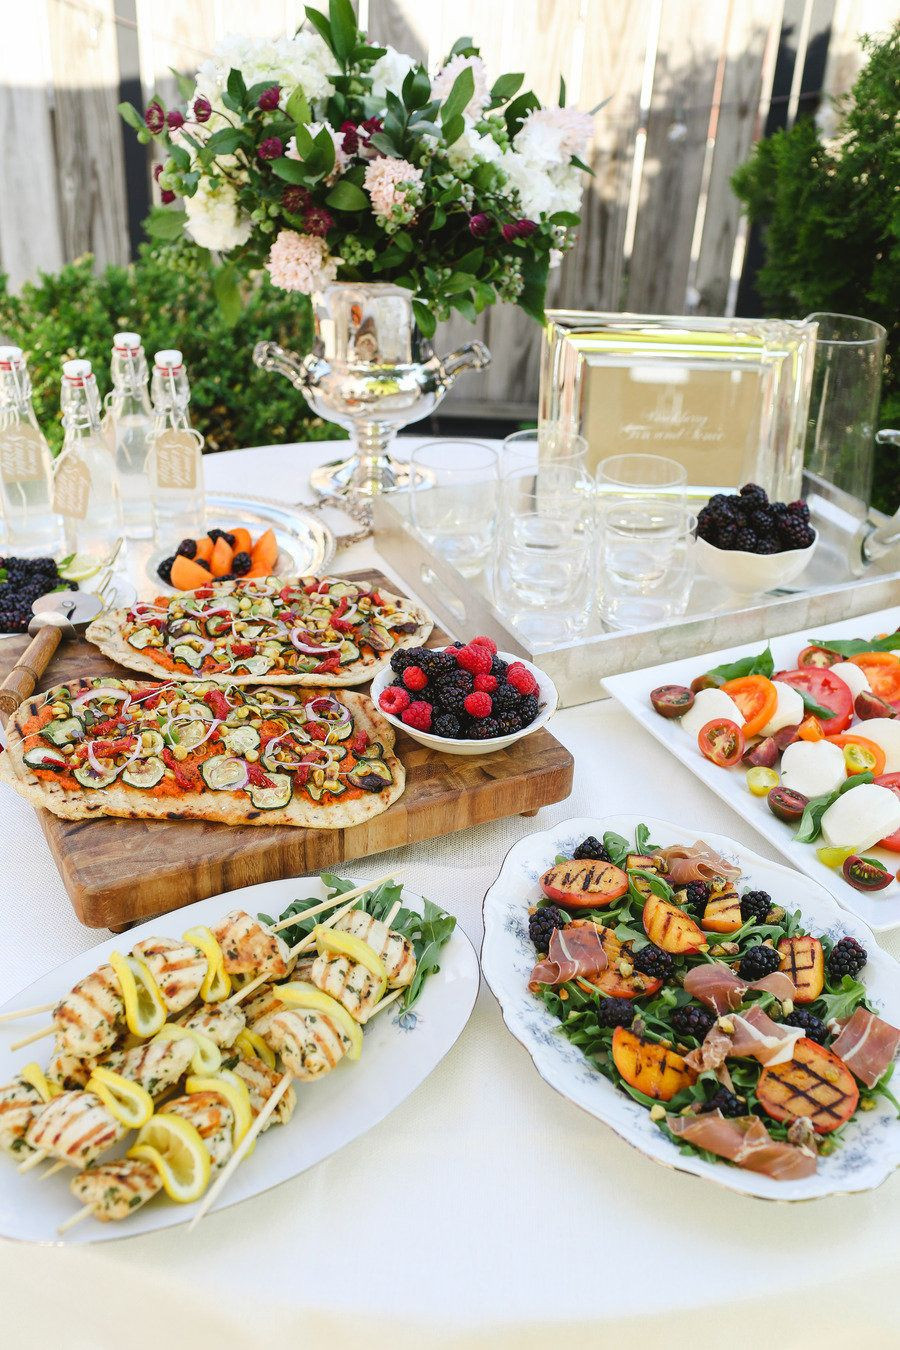 Food Ideas For Engagement Party At Home
 A Manhattan Rooftop Engagement Party from Clare Langan